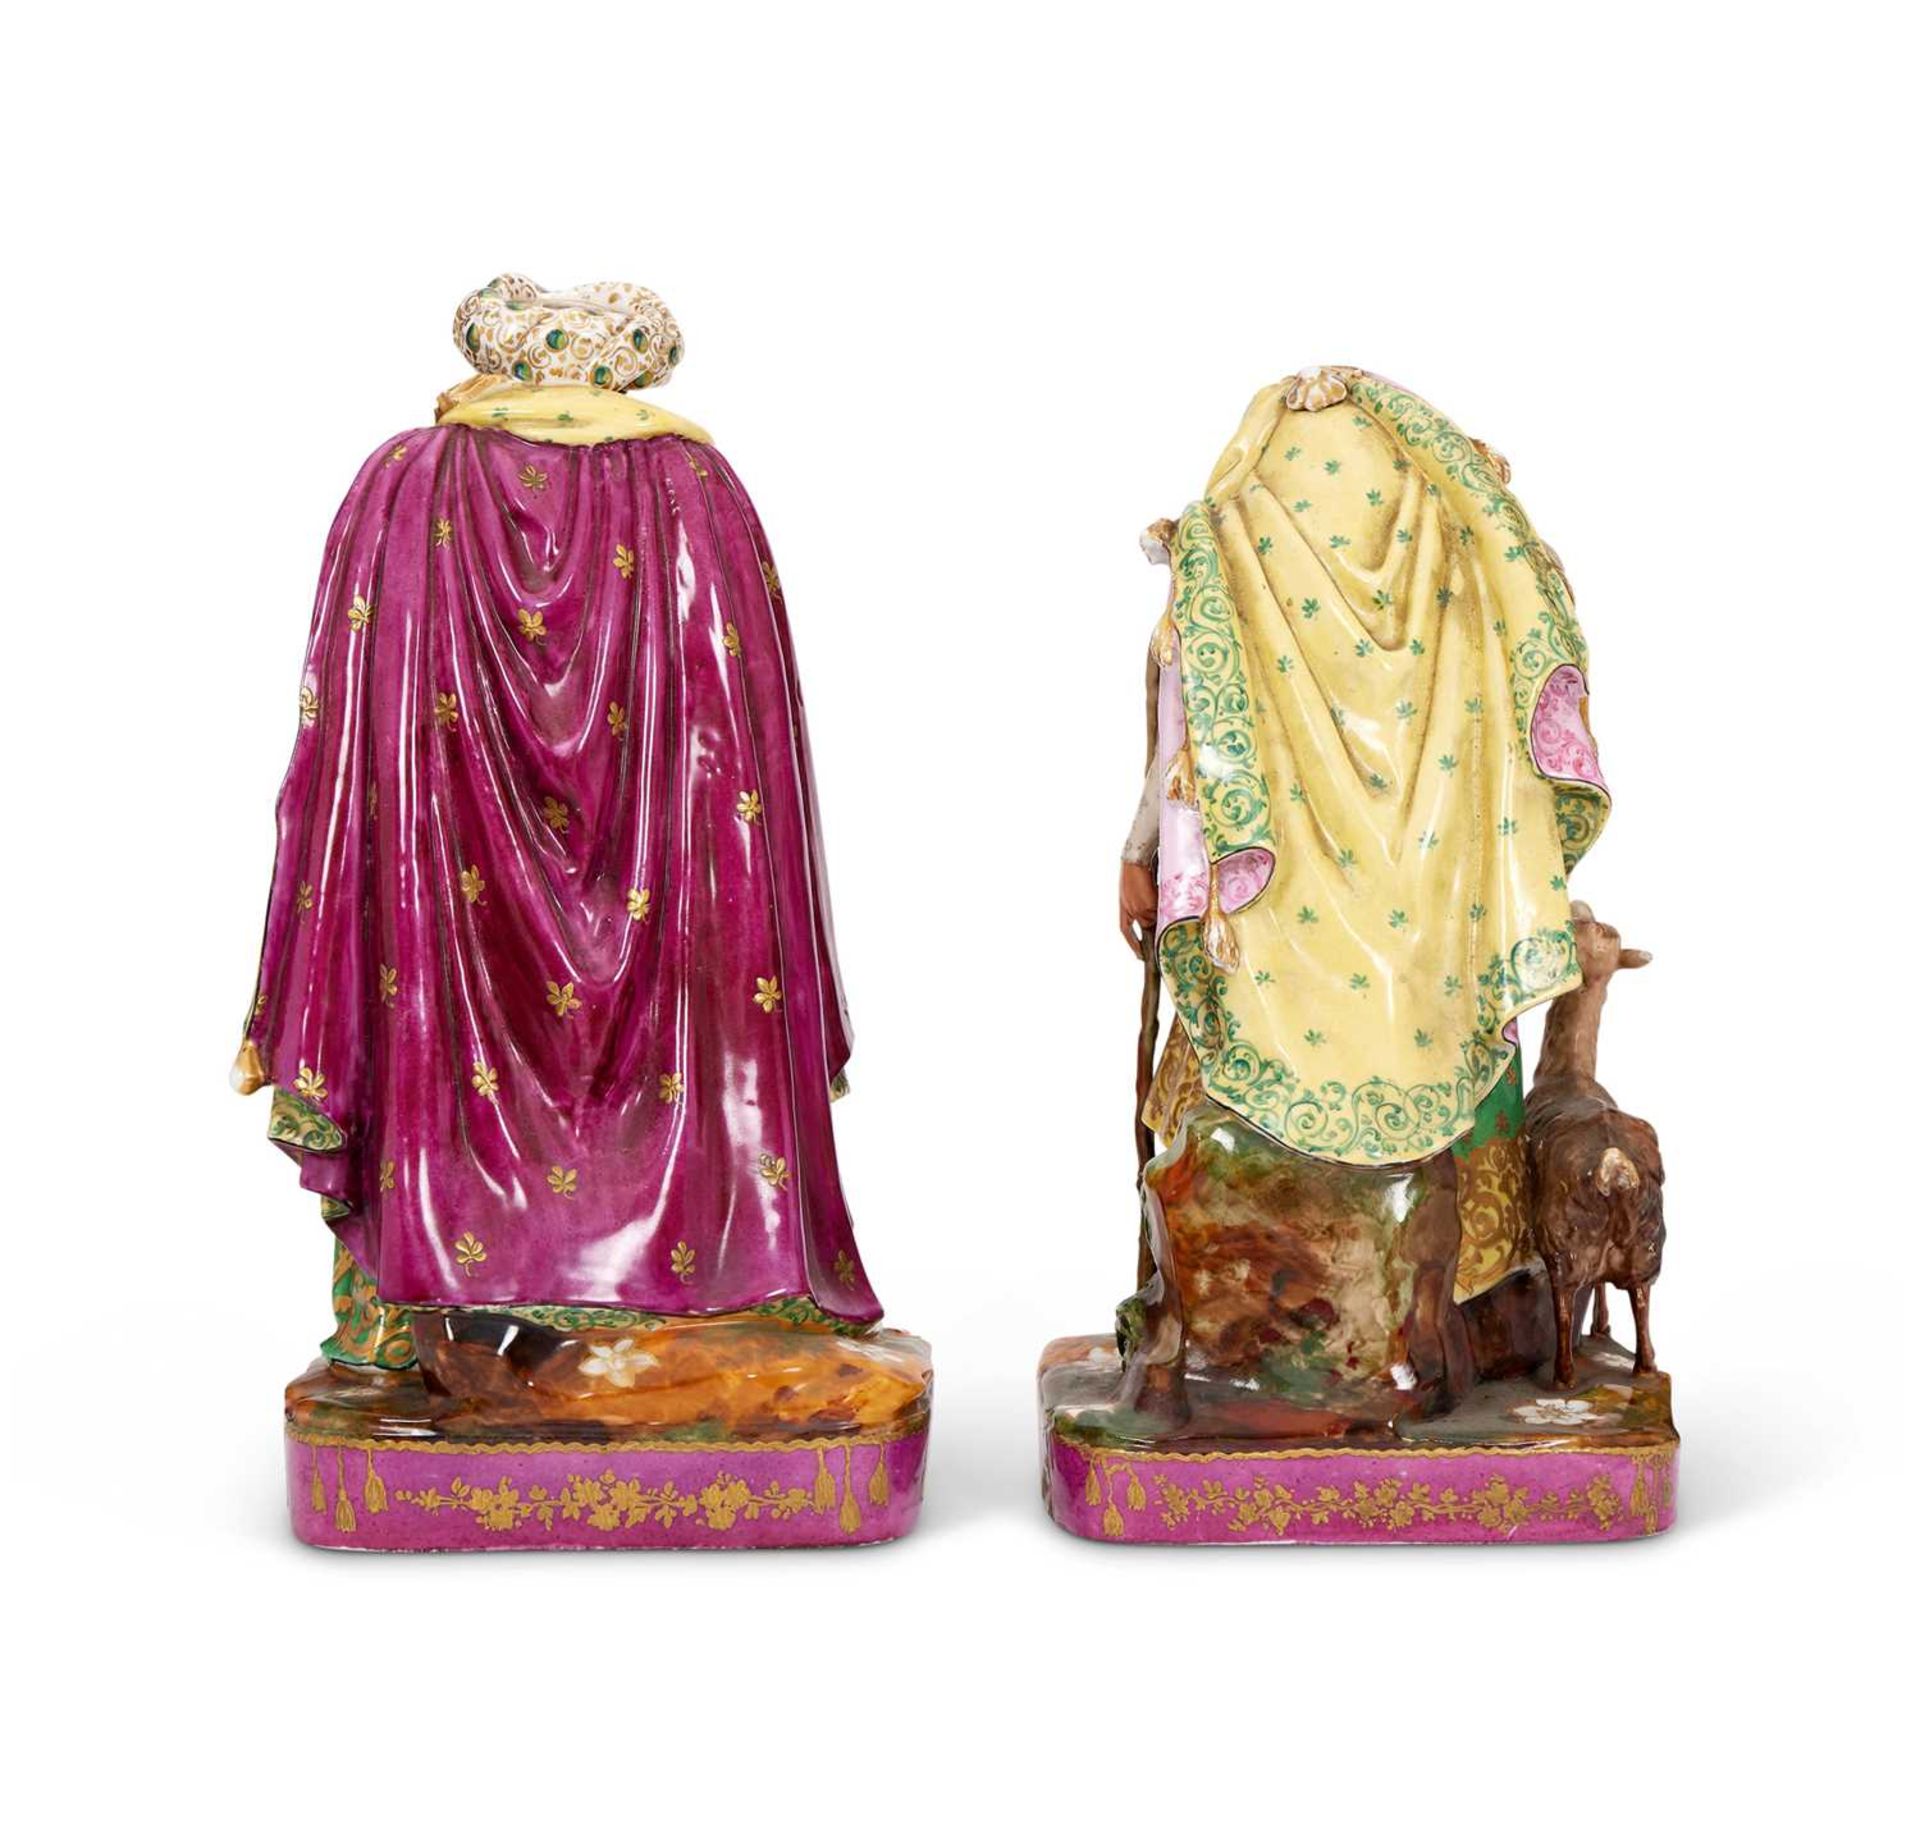 A PAIR OF MID 19TH CENTURY PARIS PORCELAIN PERFUME BOTTLES IN THE FORM OF A SULTAN AND HIS ATTENDANT - Bild 3 aus 3